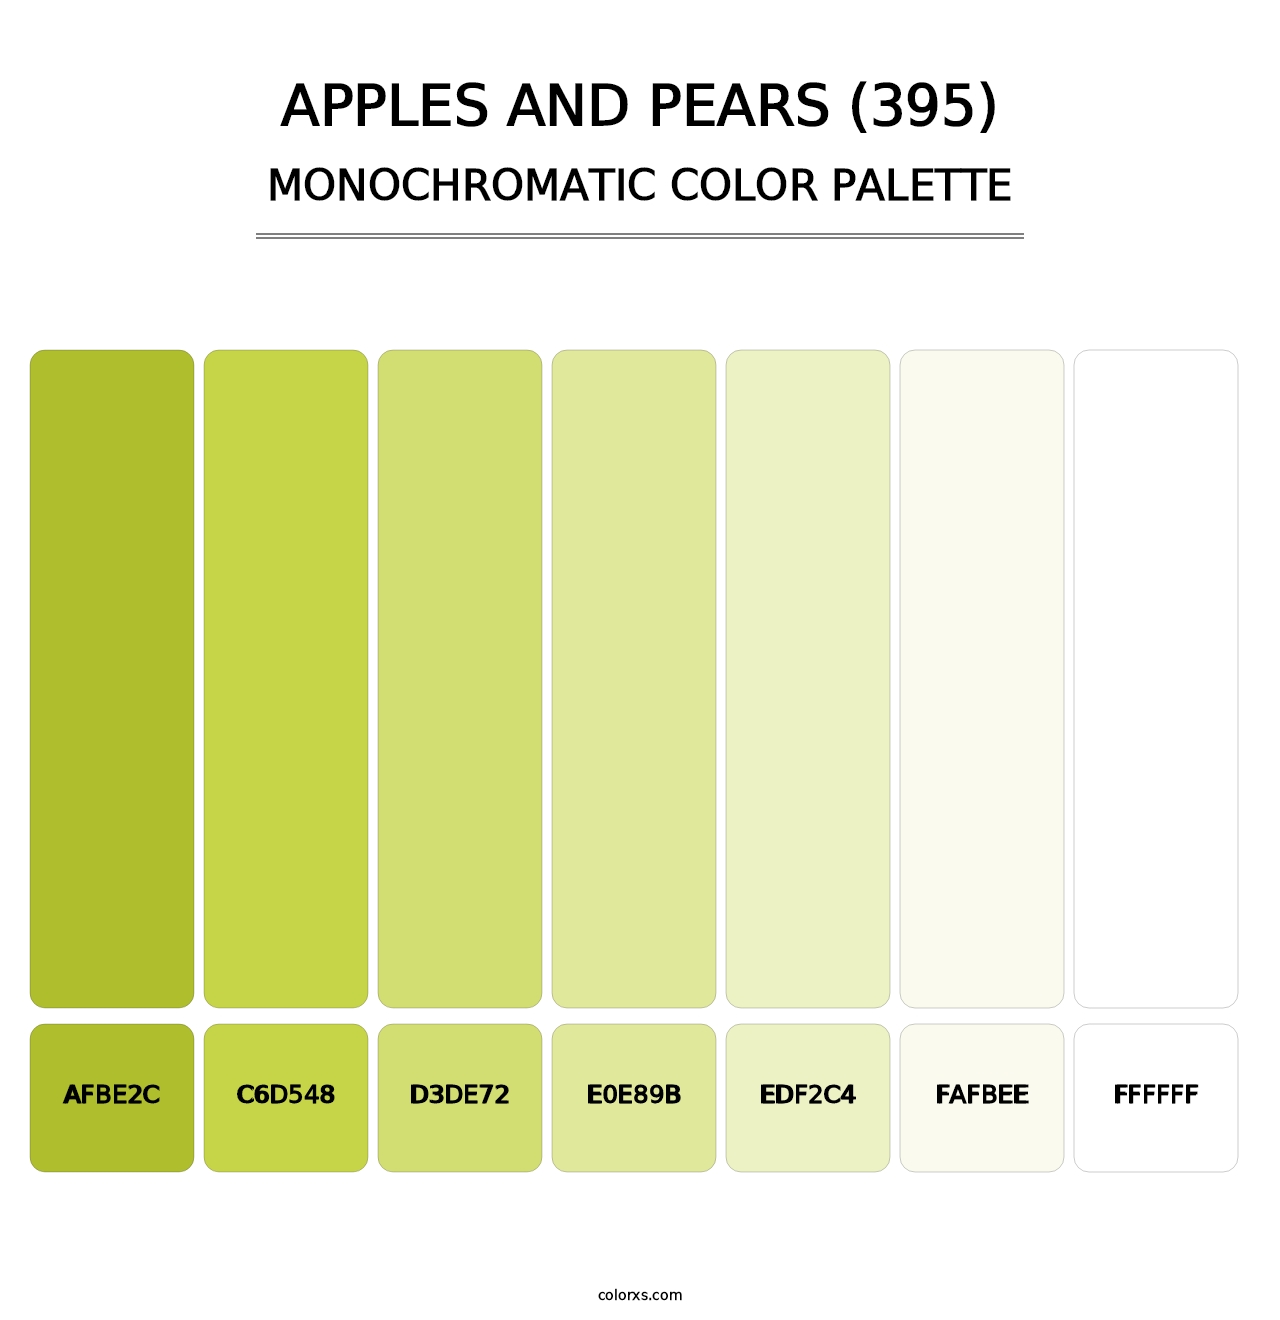 Apples and Pears (395) - Monochromatic Color Palette